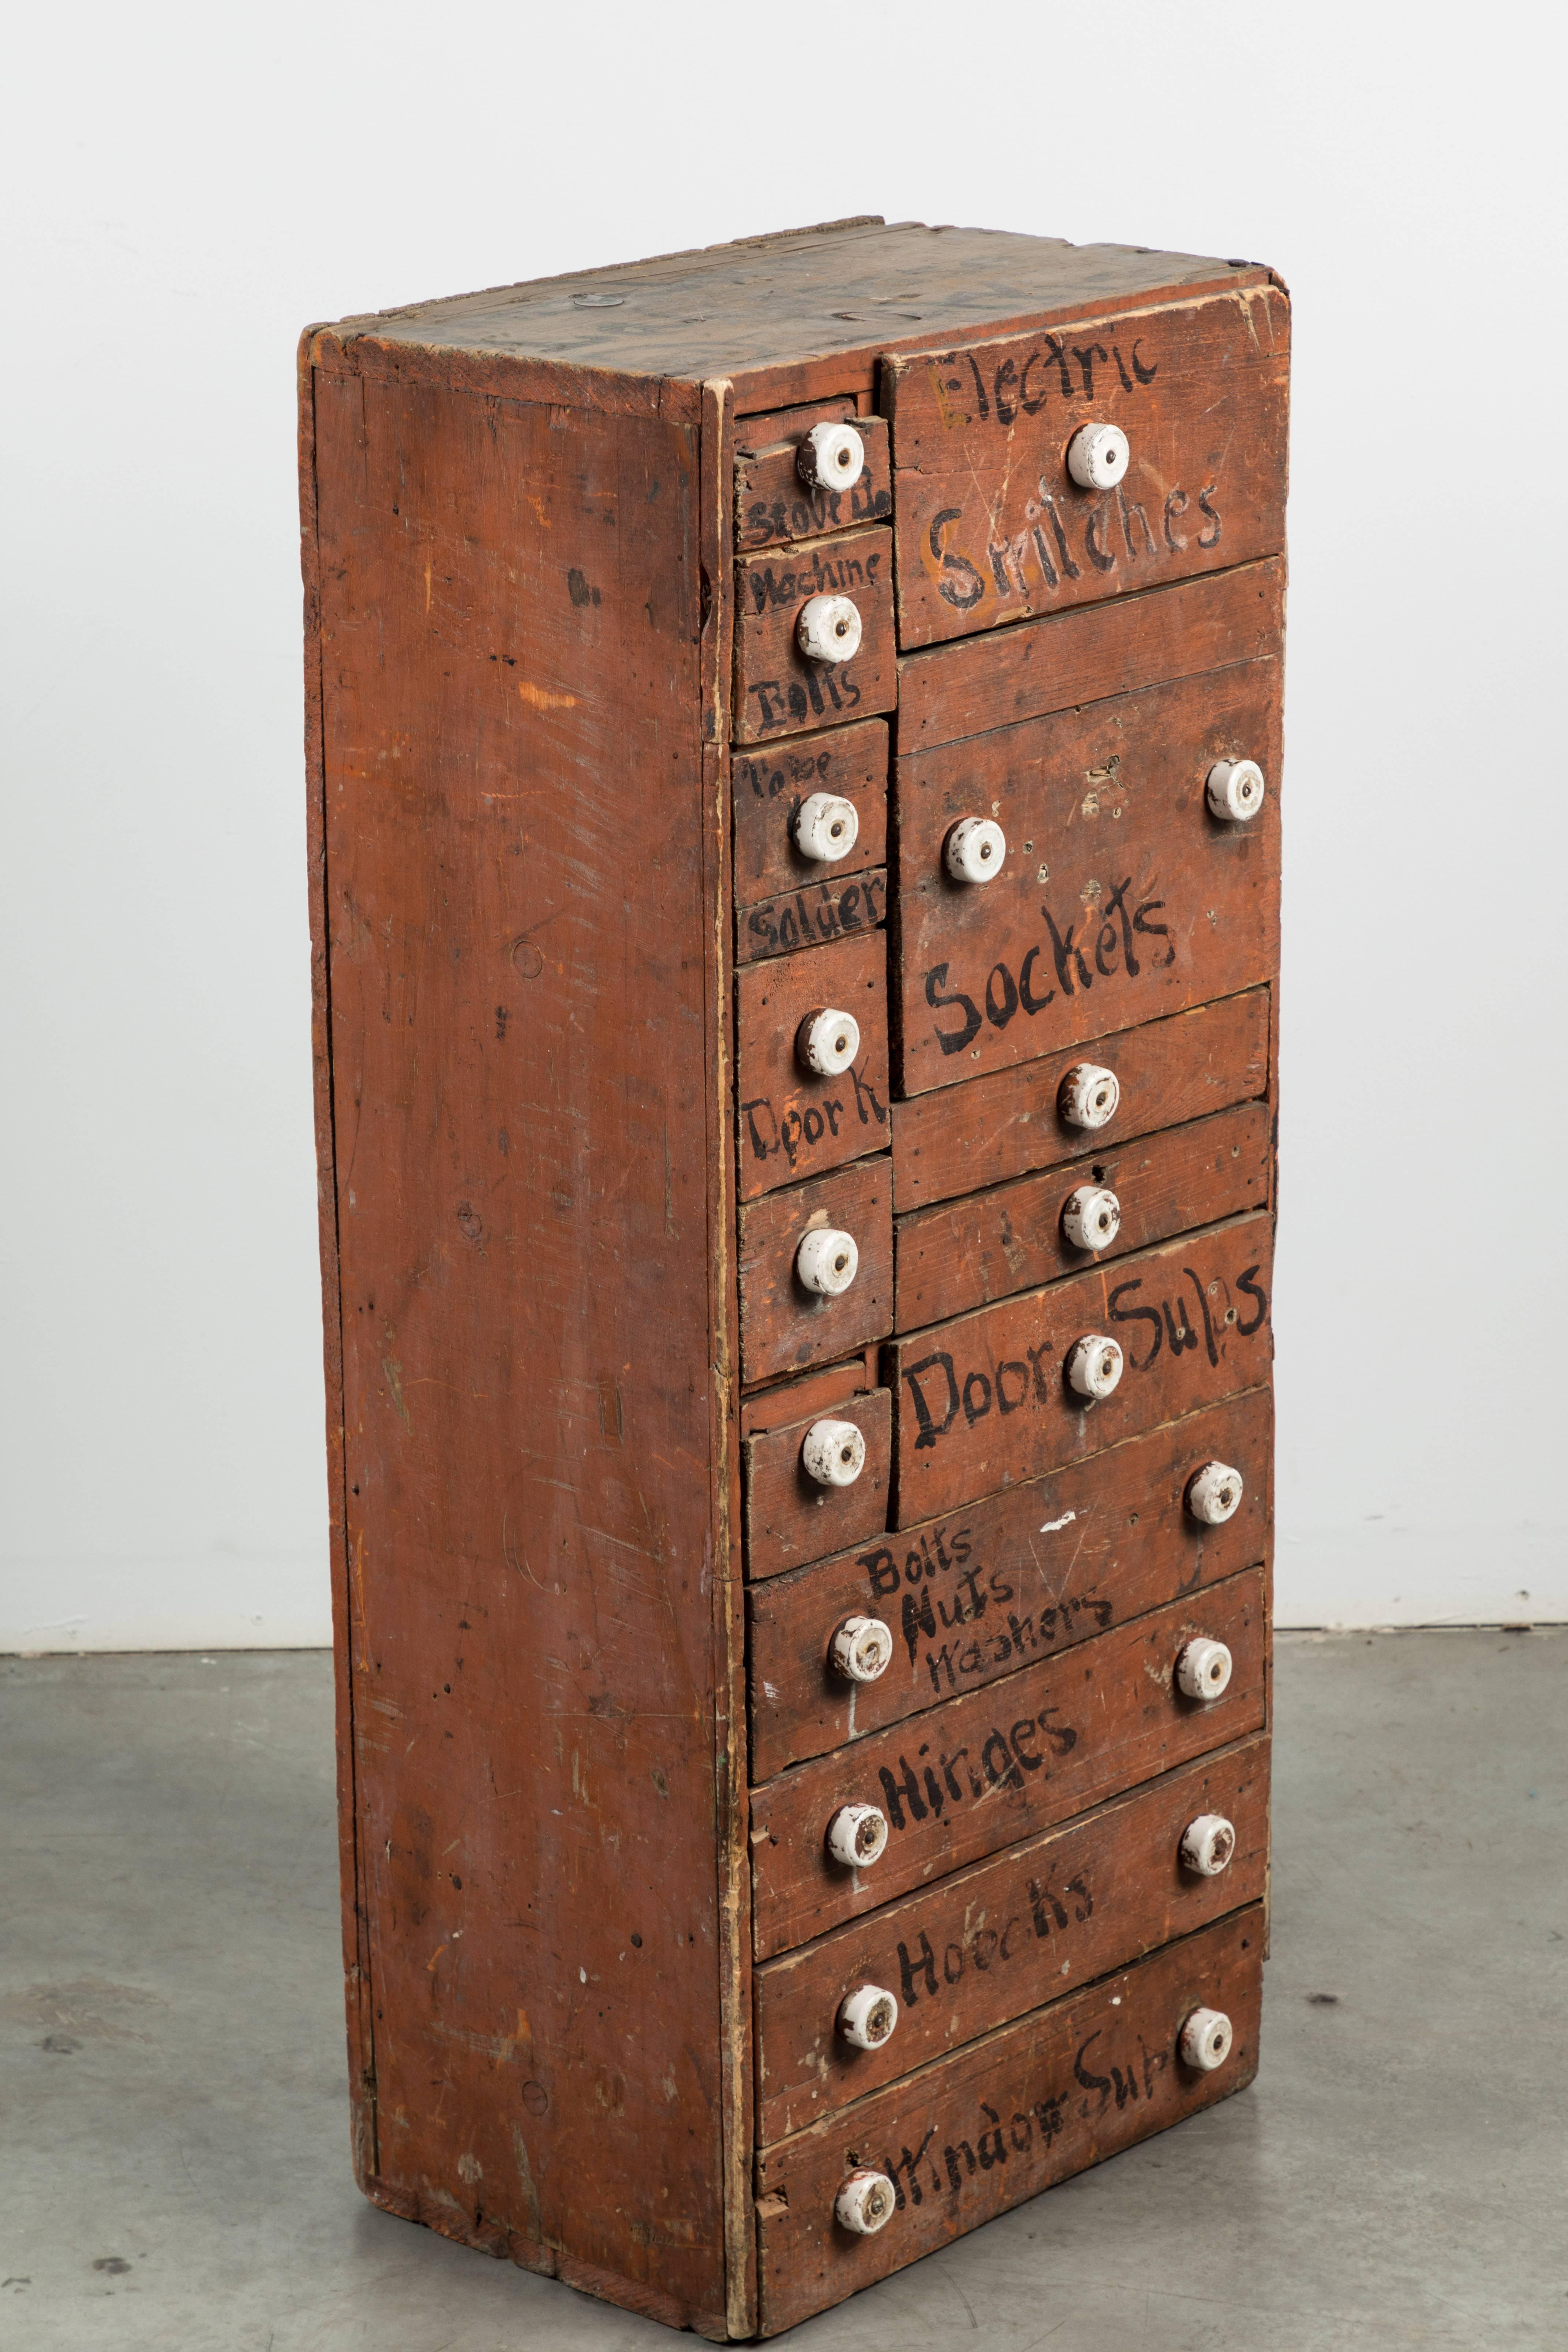 American General Store Hardware Cubby Apothecary Bins Found in the Midwest, circa 1900